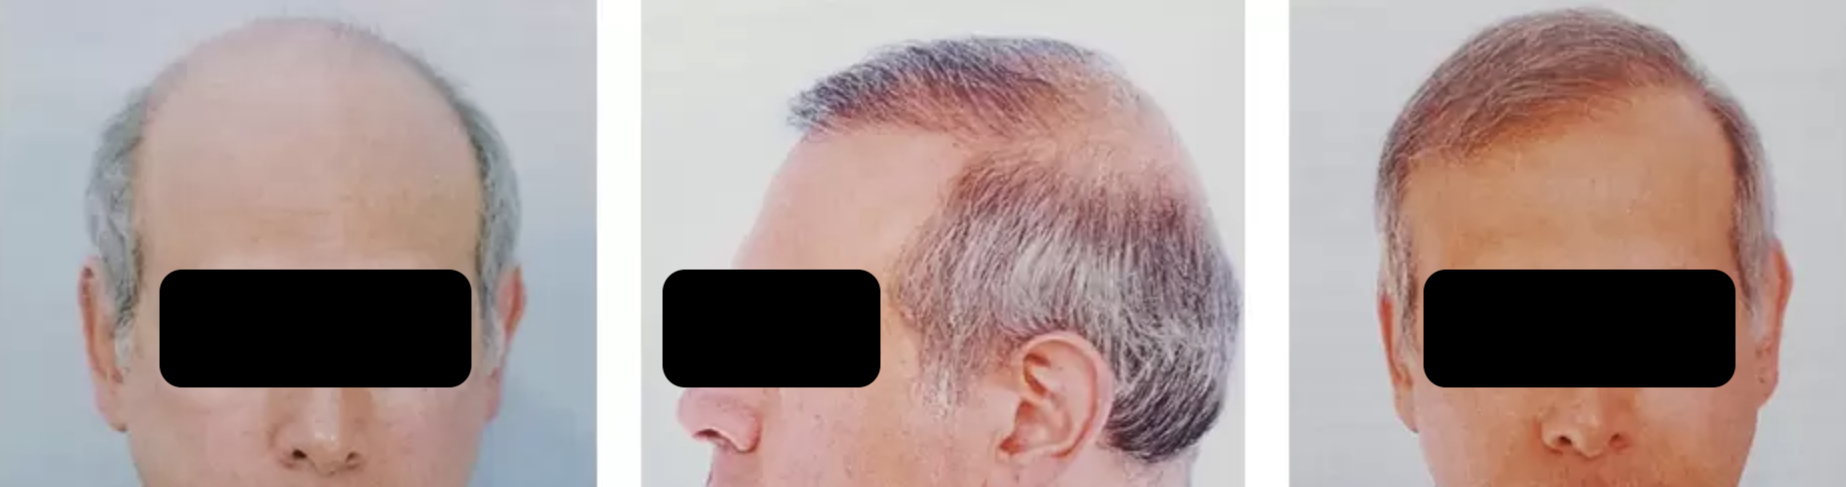 norwood 7 before and after hair transplant 2